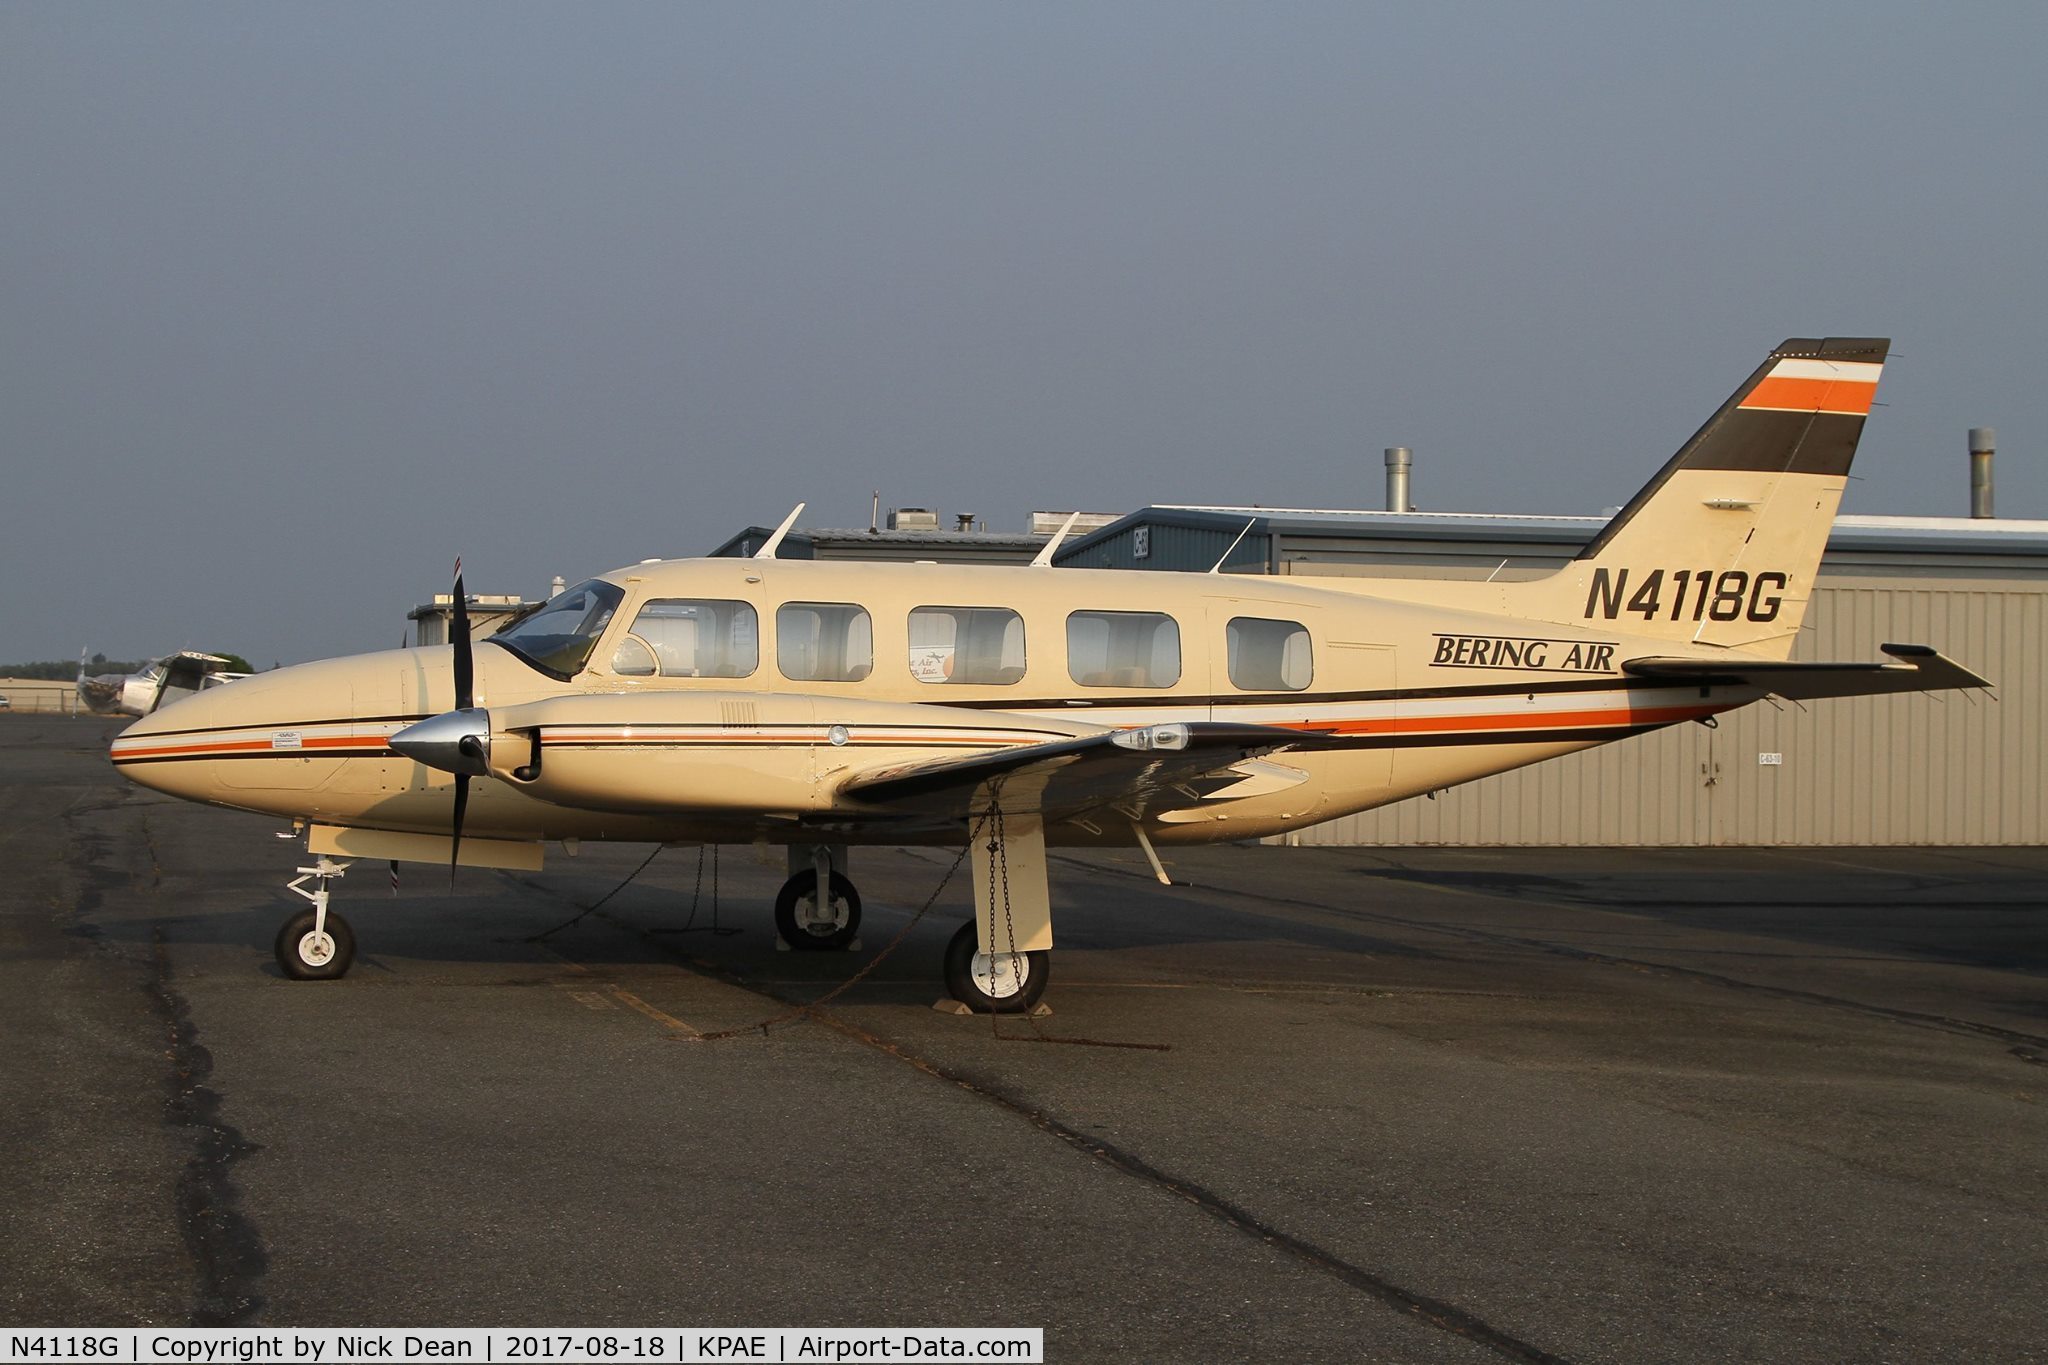 N4118G, 1984 Piper PA-31-350 Chieftain C/N 31-8453001, Fresh from paint at Sunquest Air Specialties